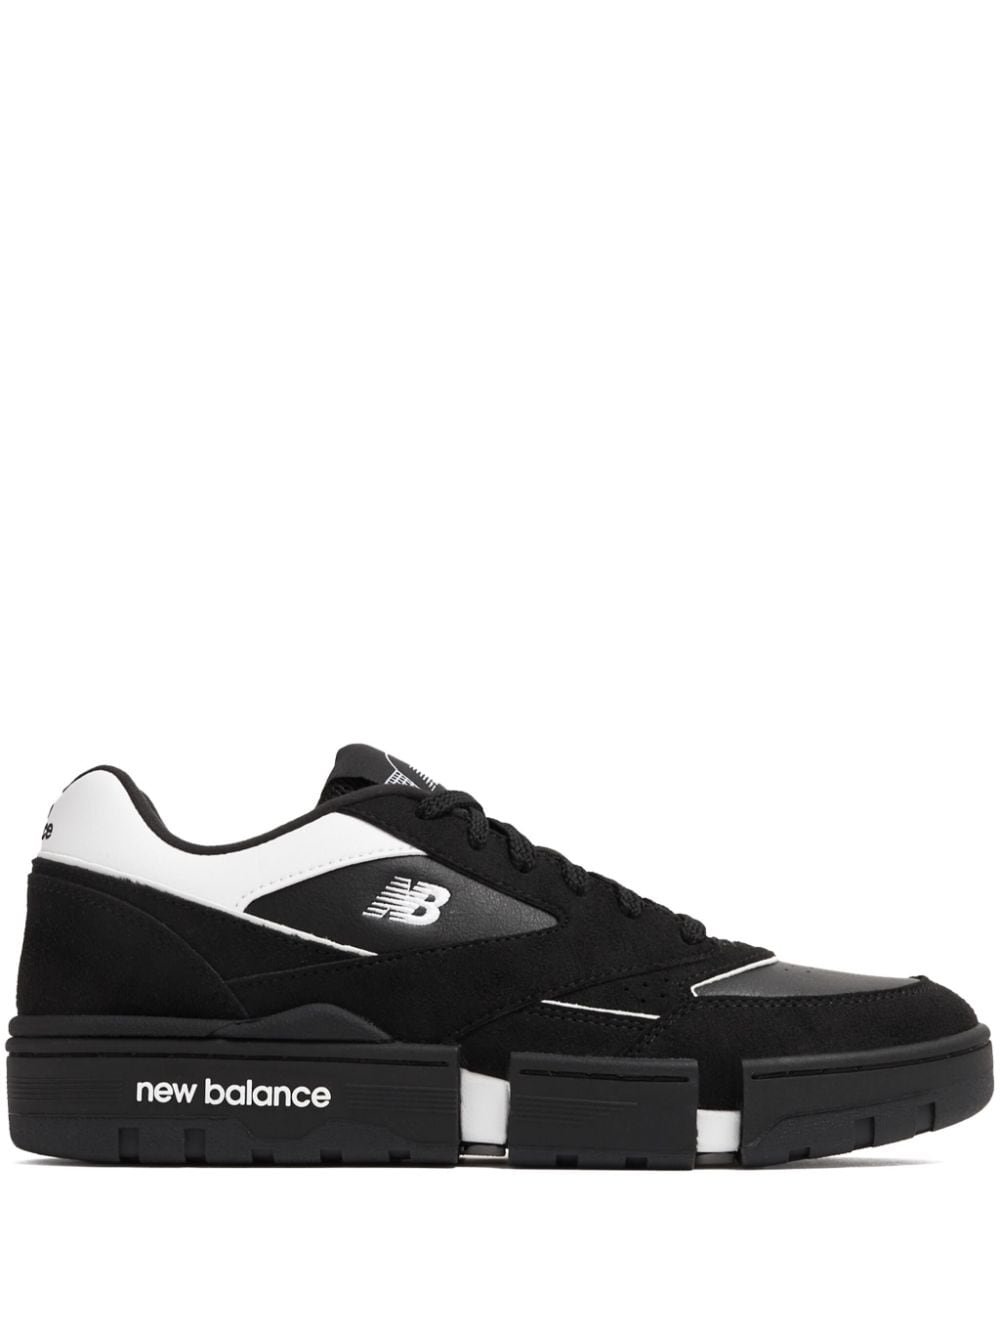 New Balance x MSFTSrep lace-up sneakers Black